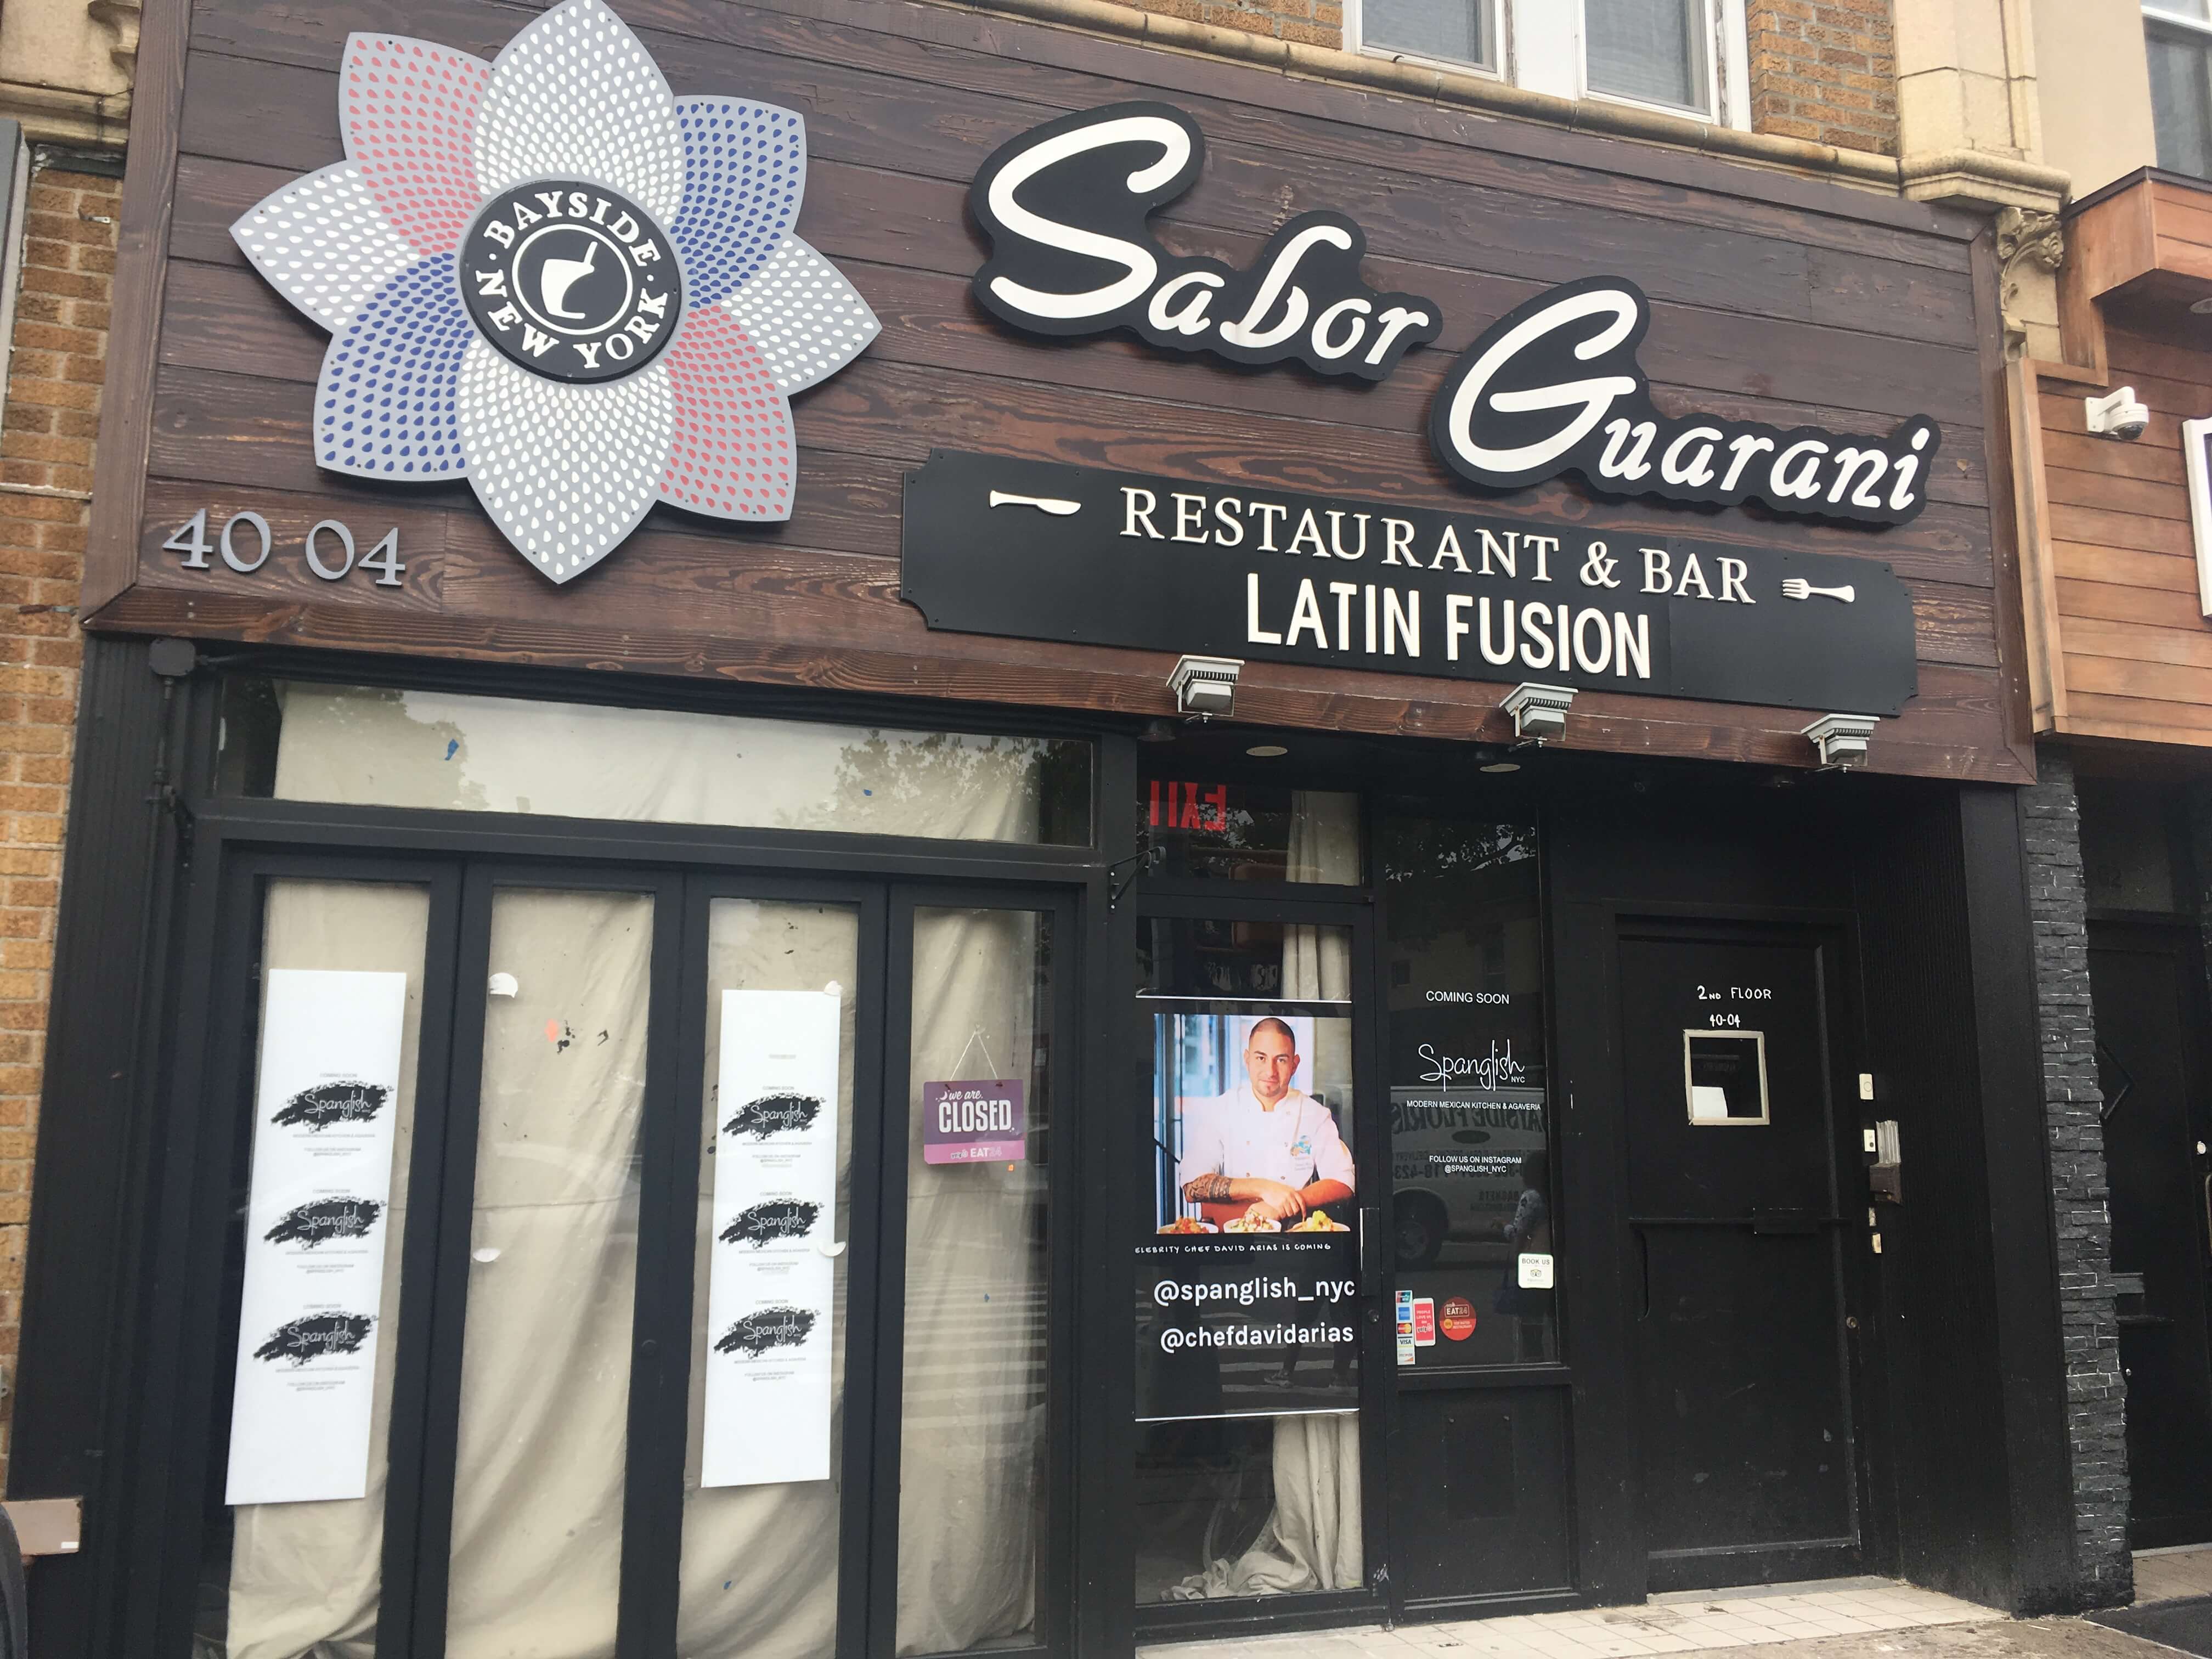 Spanglish NYC, a modern Mexican restaurant, is soon coming to the former Sabor Guarani restaurant on Bell Boulevard in Bayside.